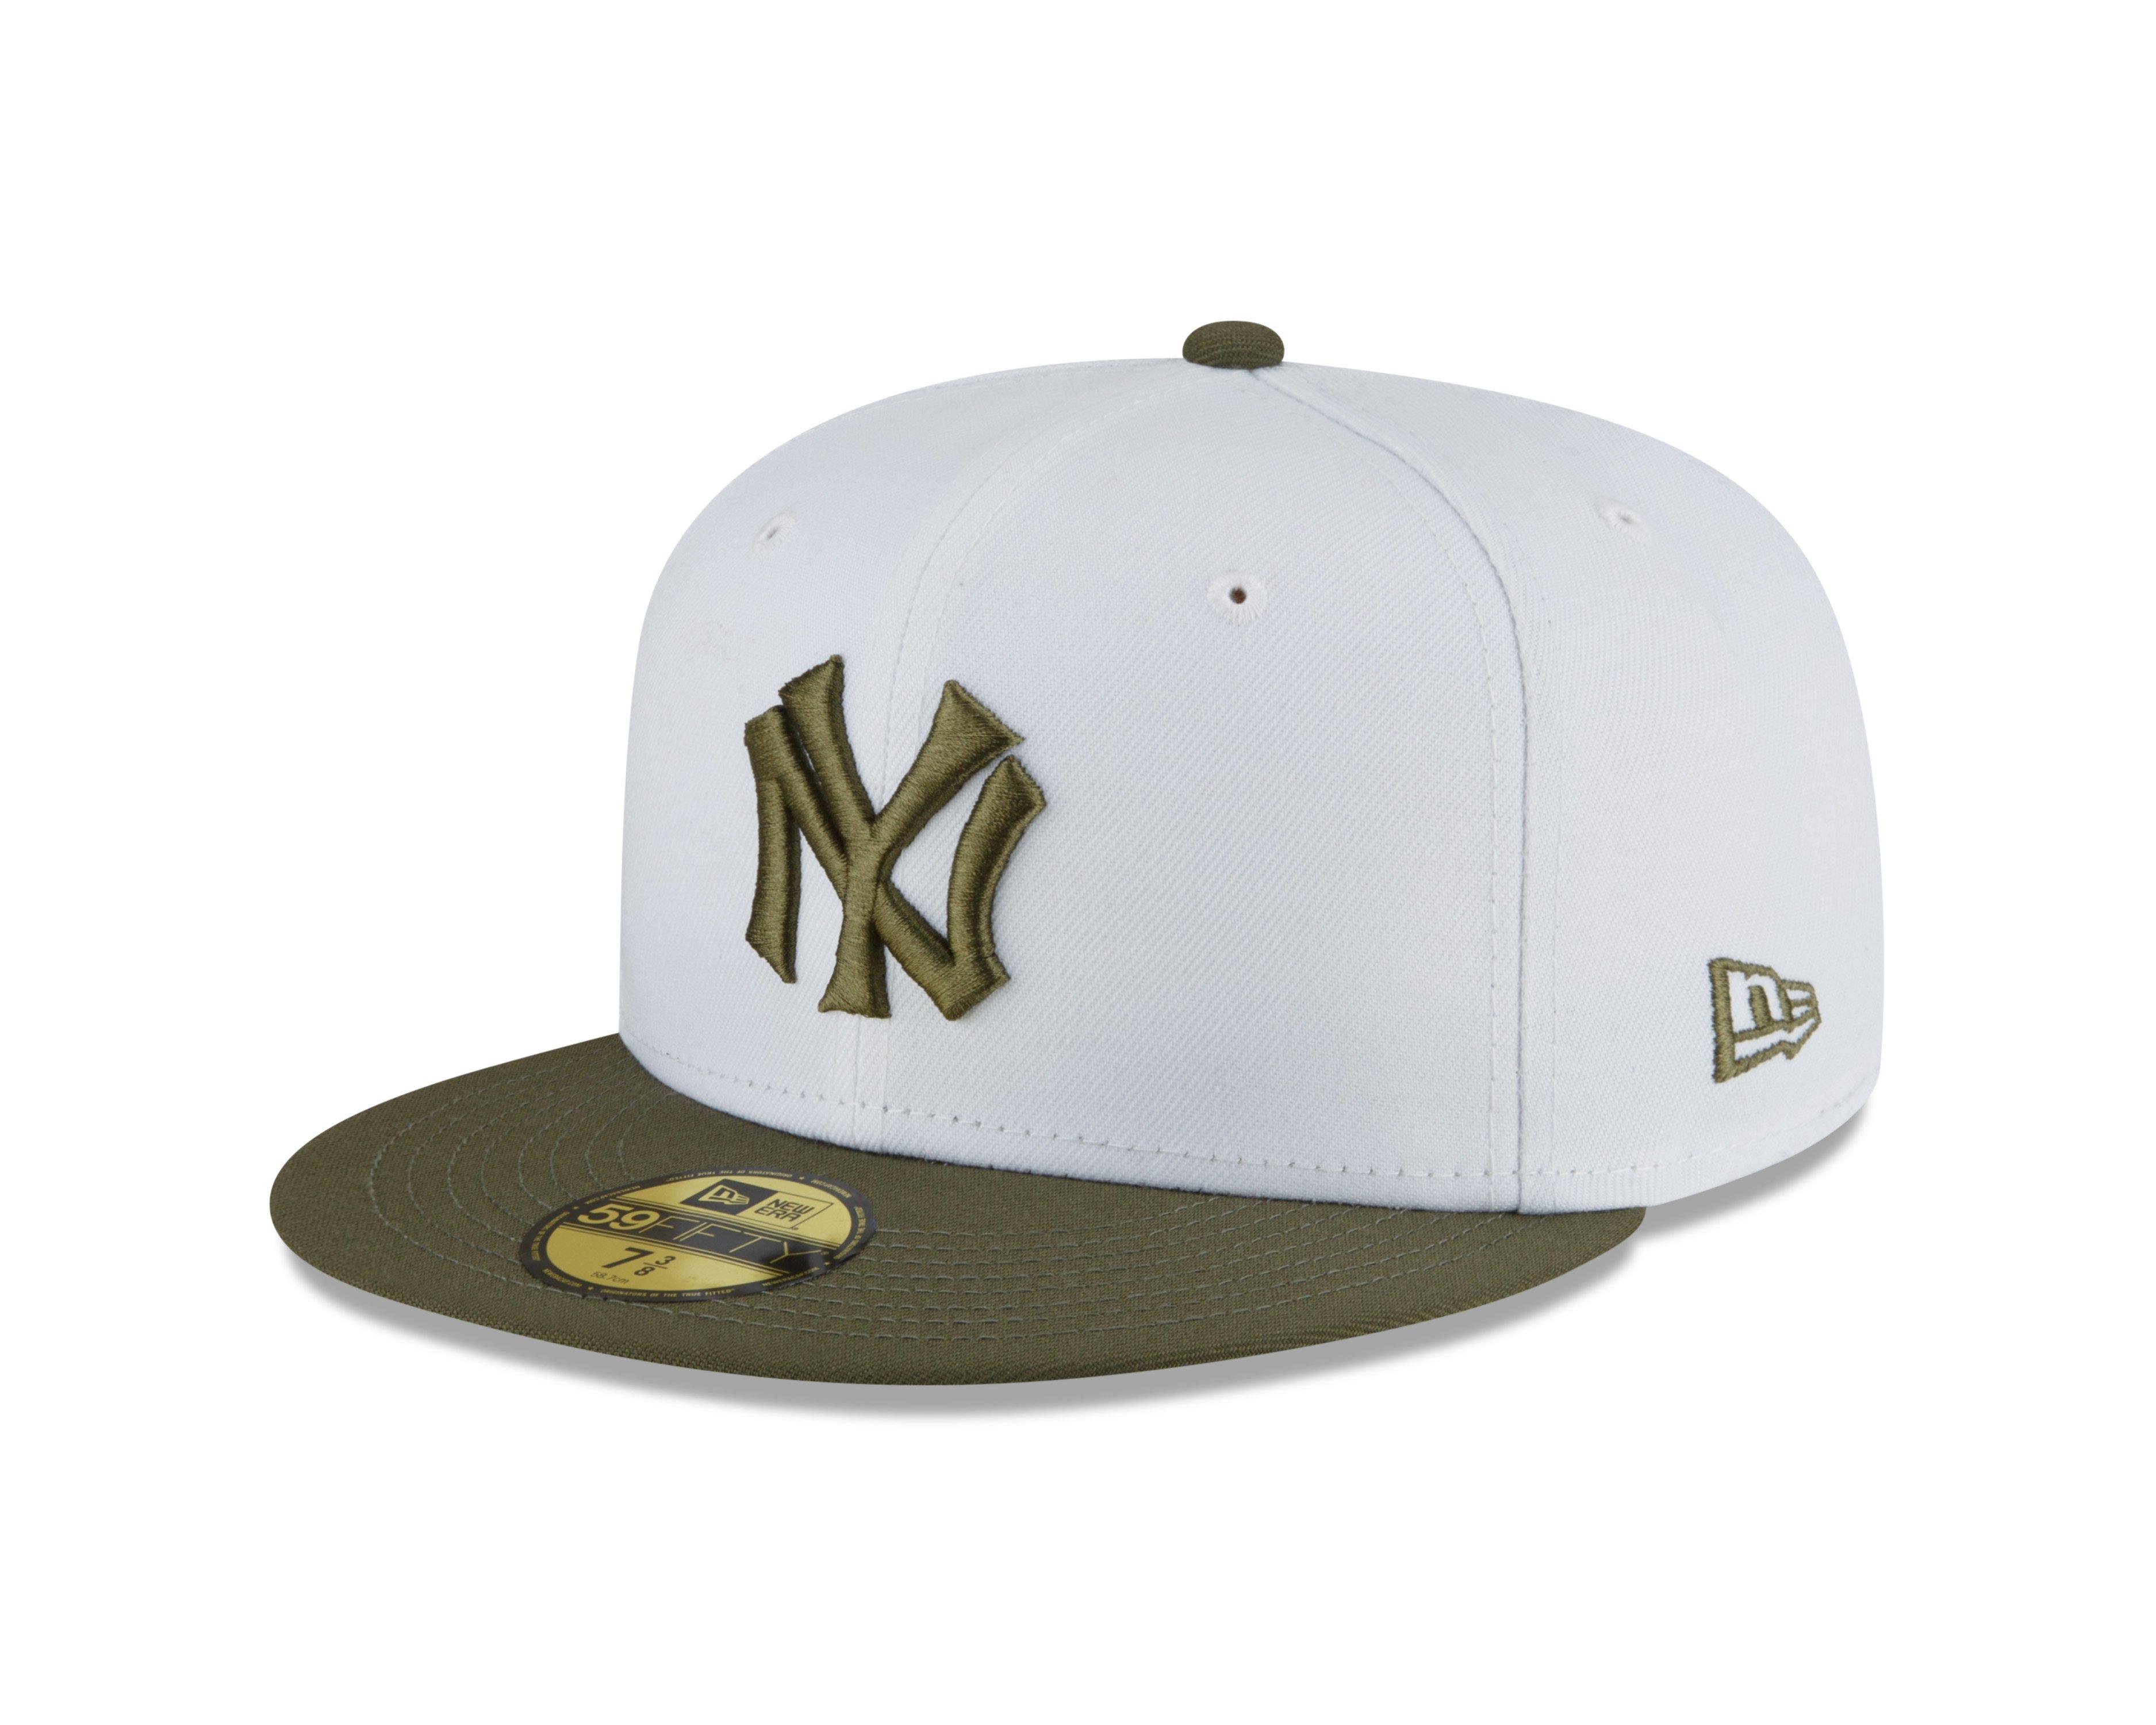 New York Highlanders 1903 COOPERSTOWN Fitted Hat by New Era